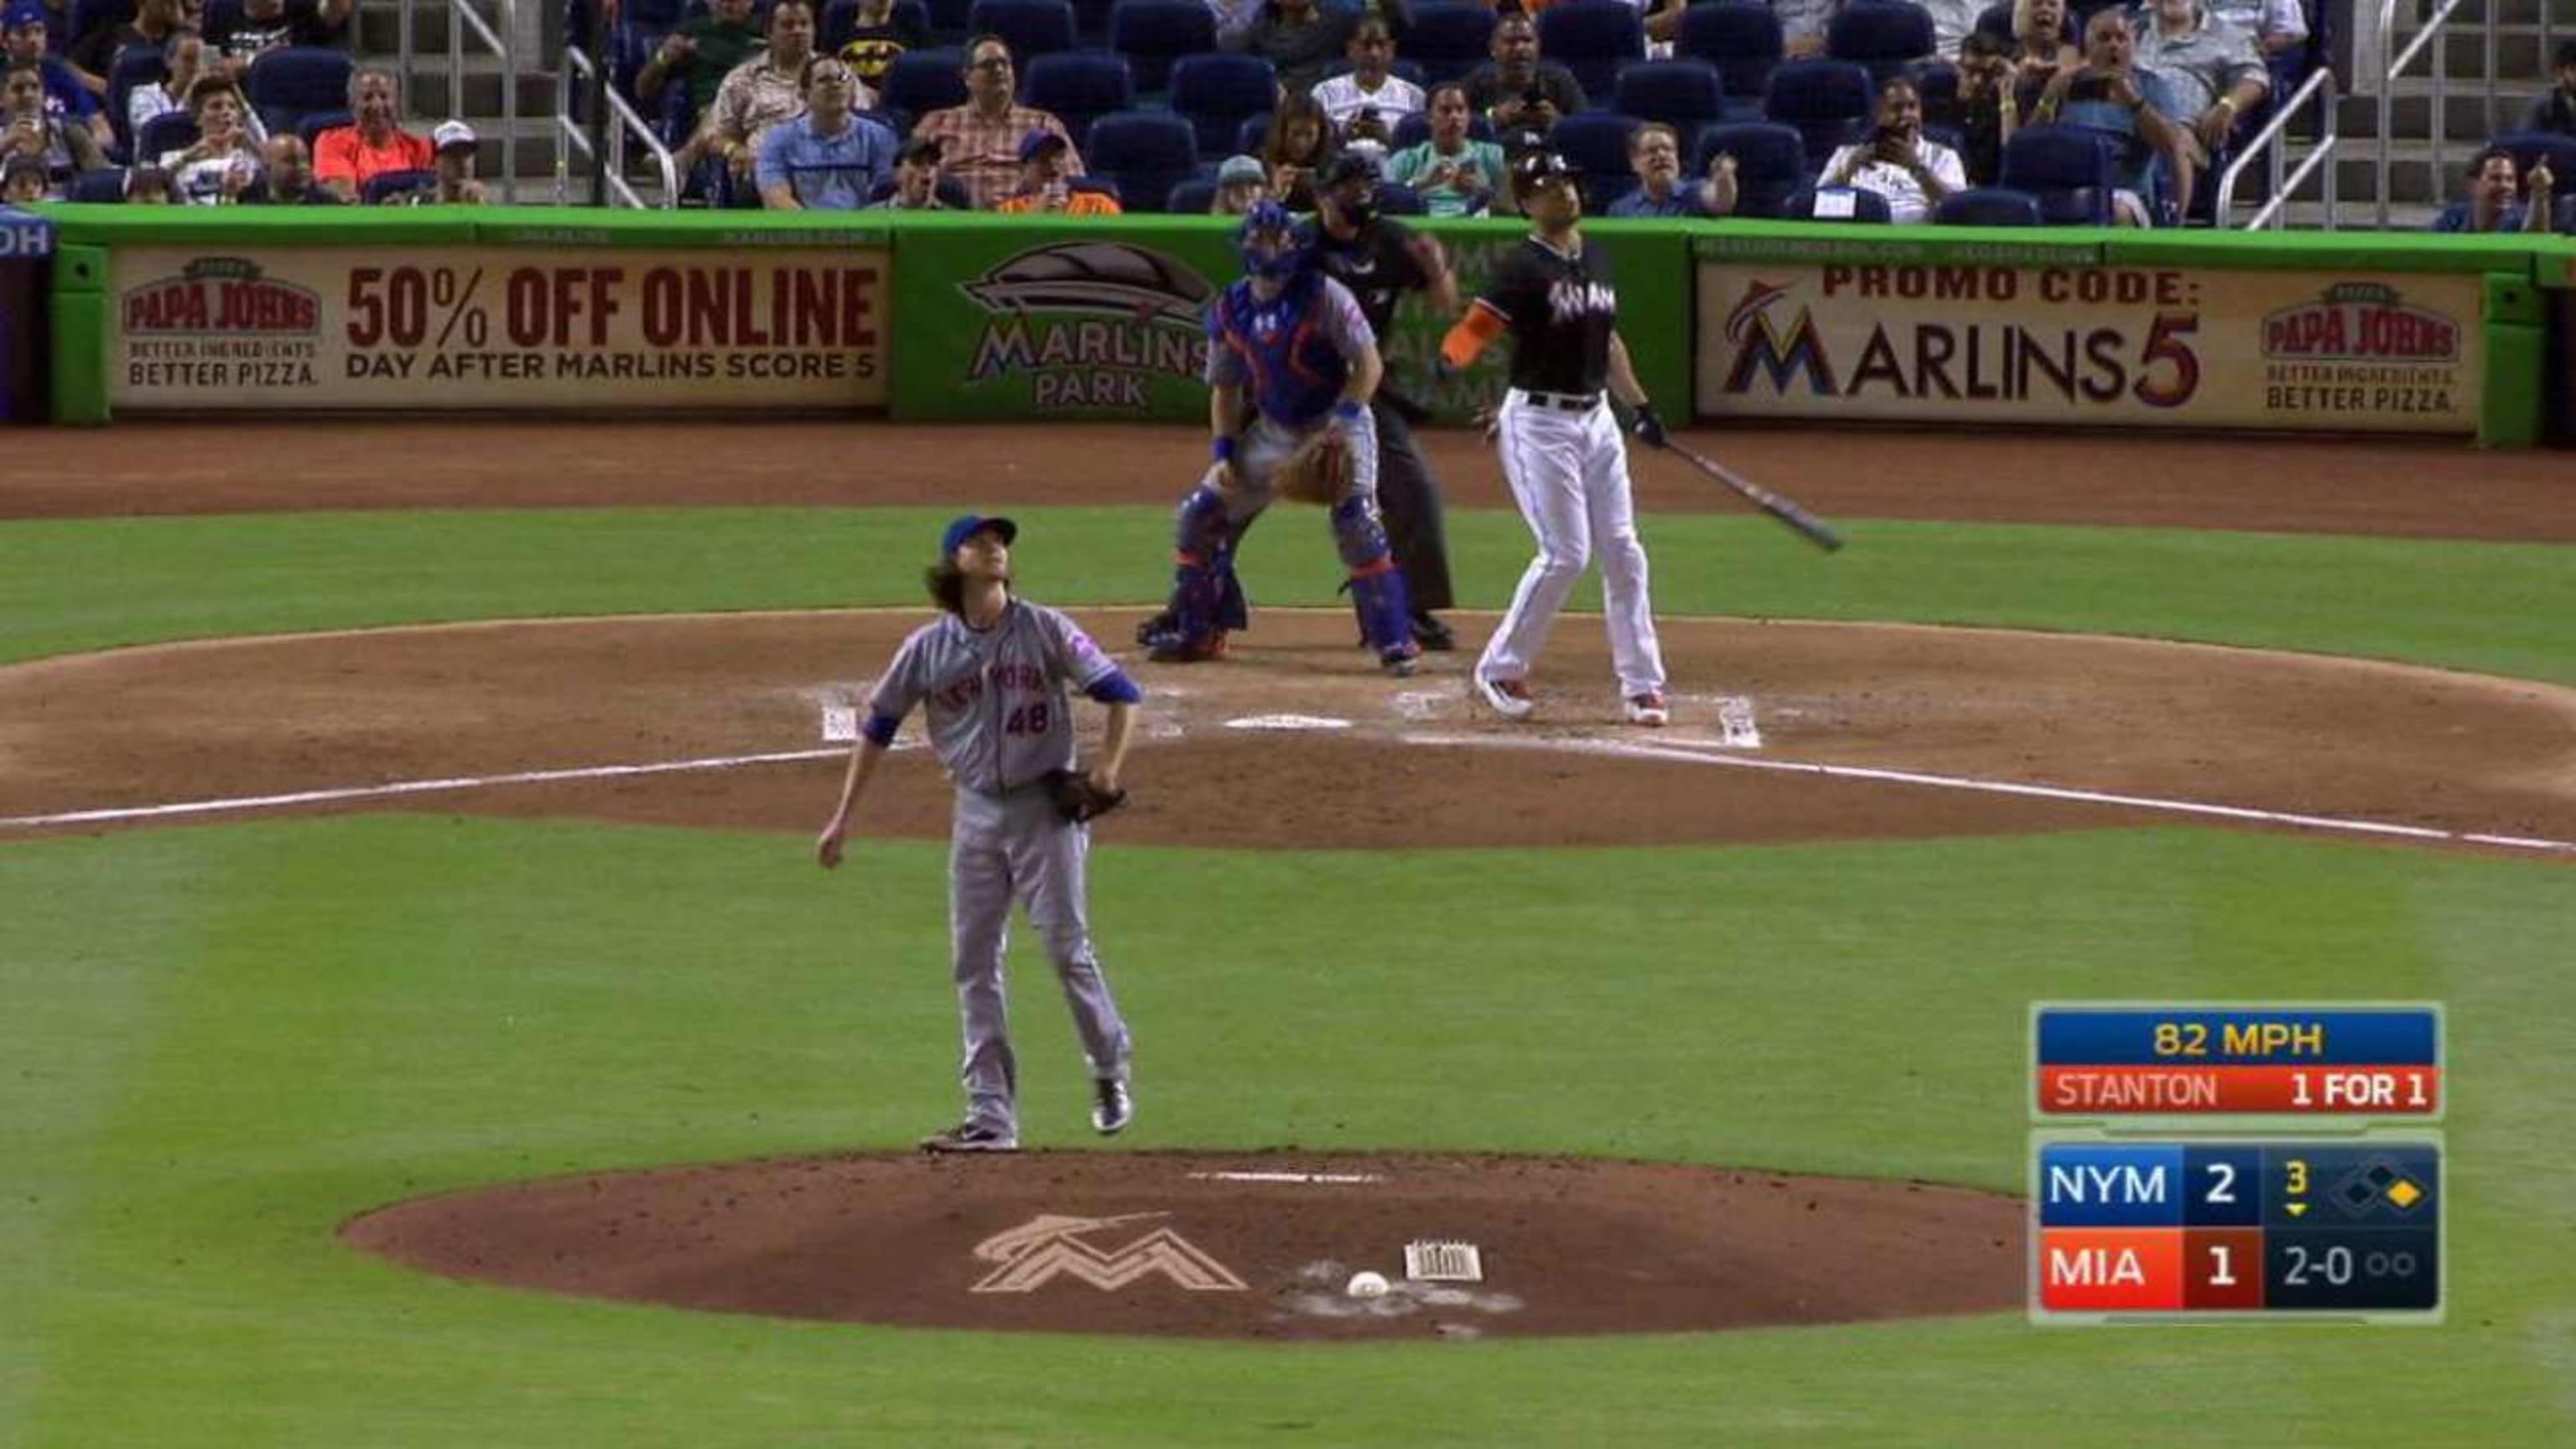 Giancarlo Stanton hit a homer off the scoreboard and Dontrelle